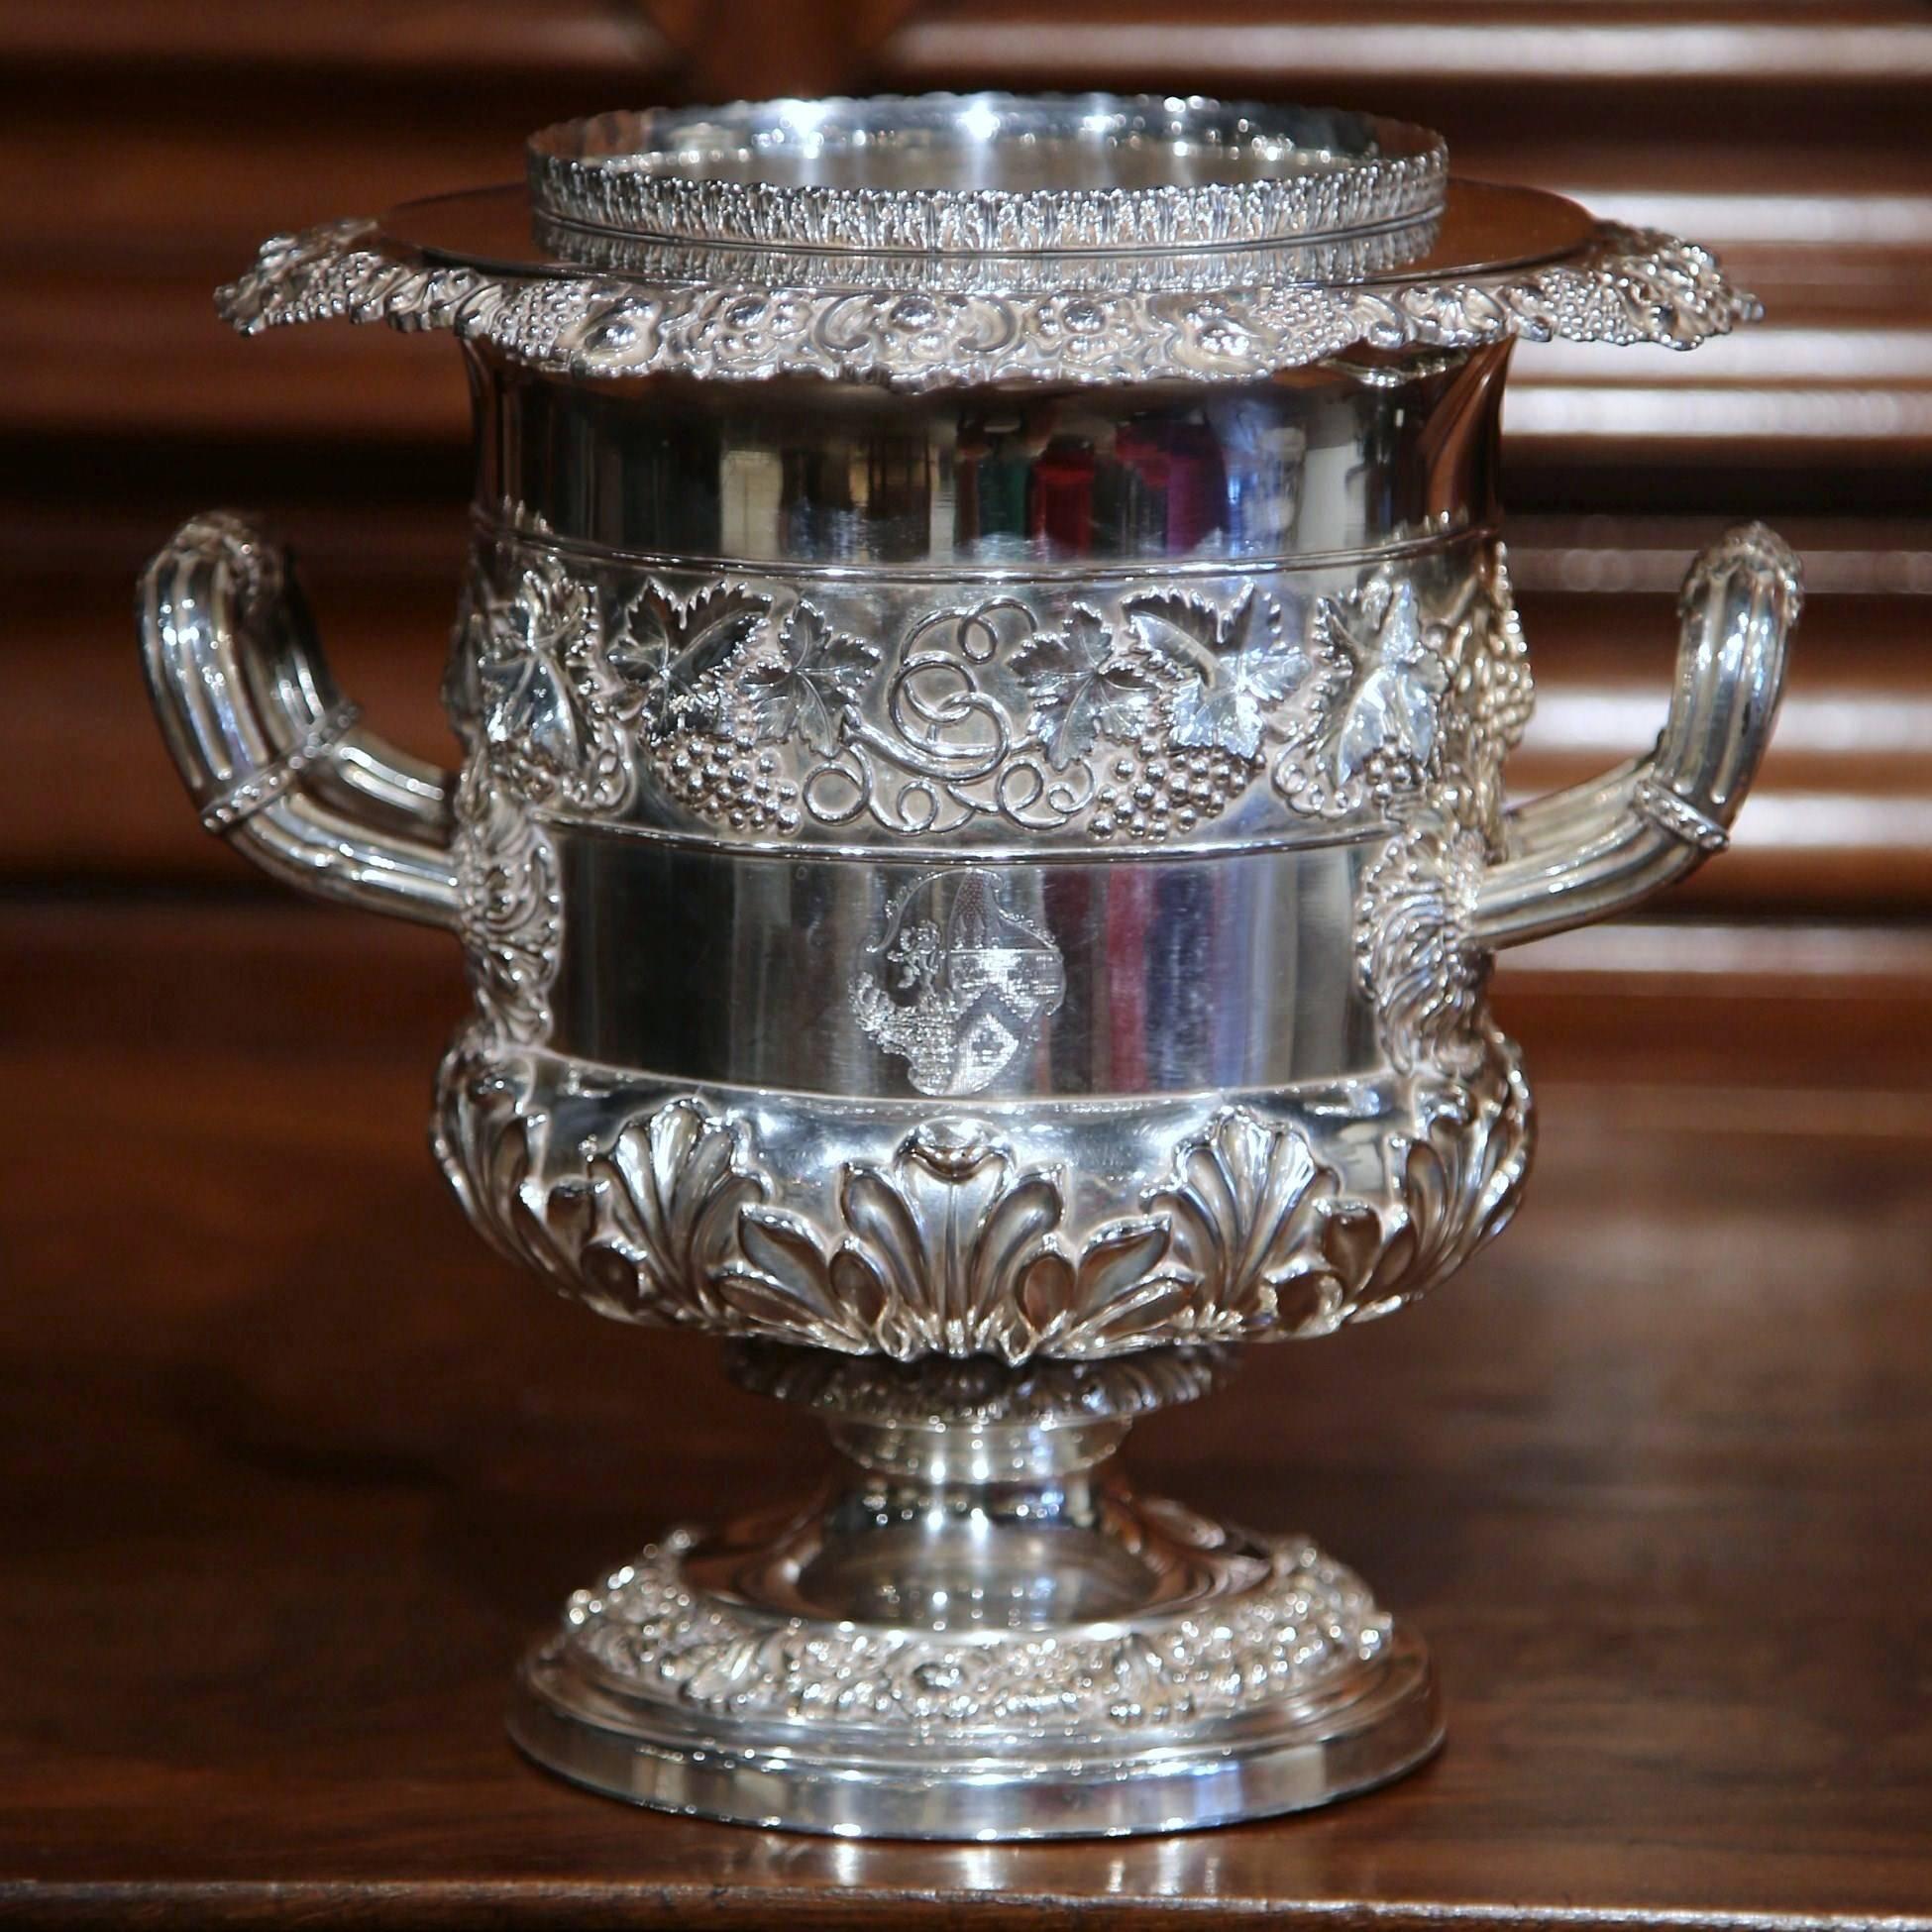 Early 20th Century English Silver Plated Wine Cooler with Engraved Coat of Arms 1